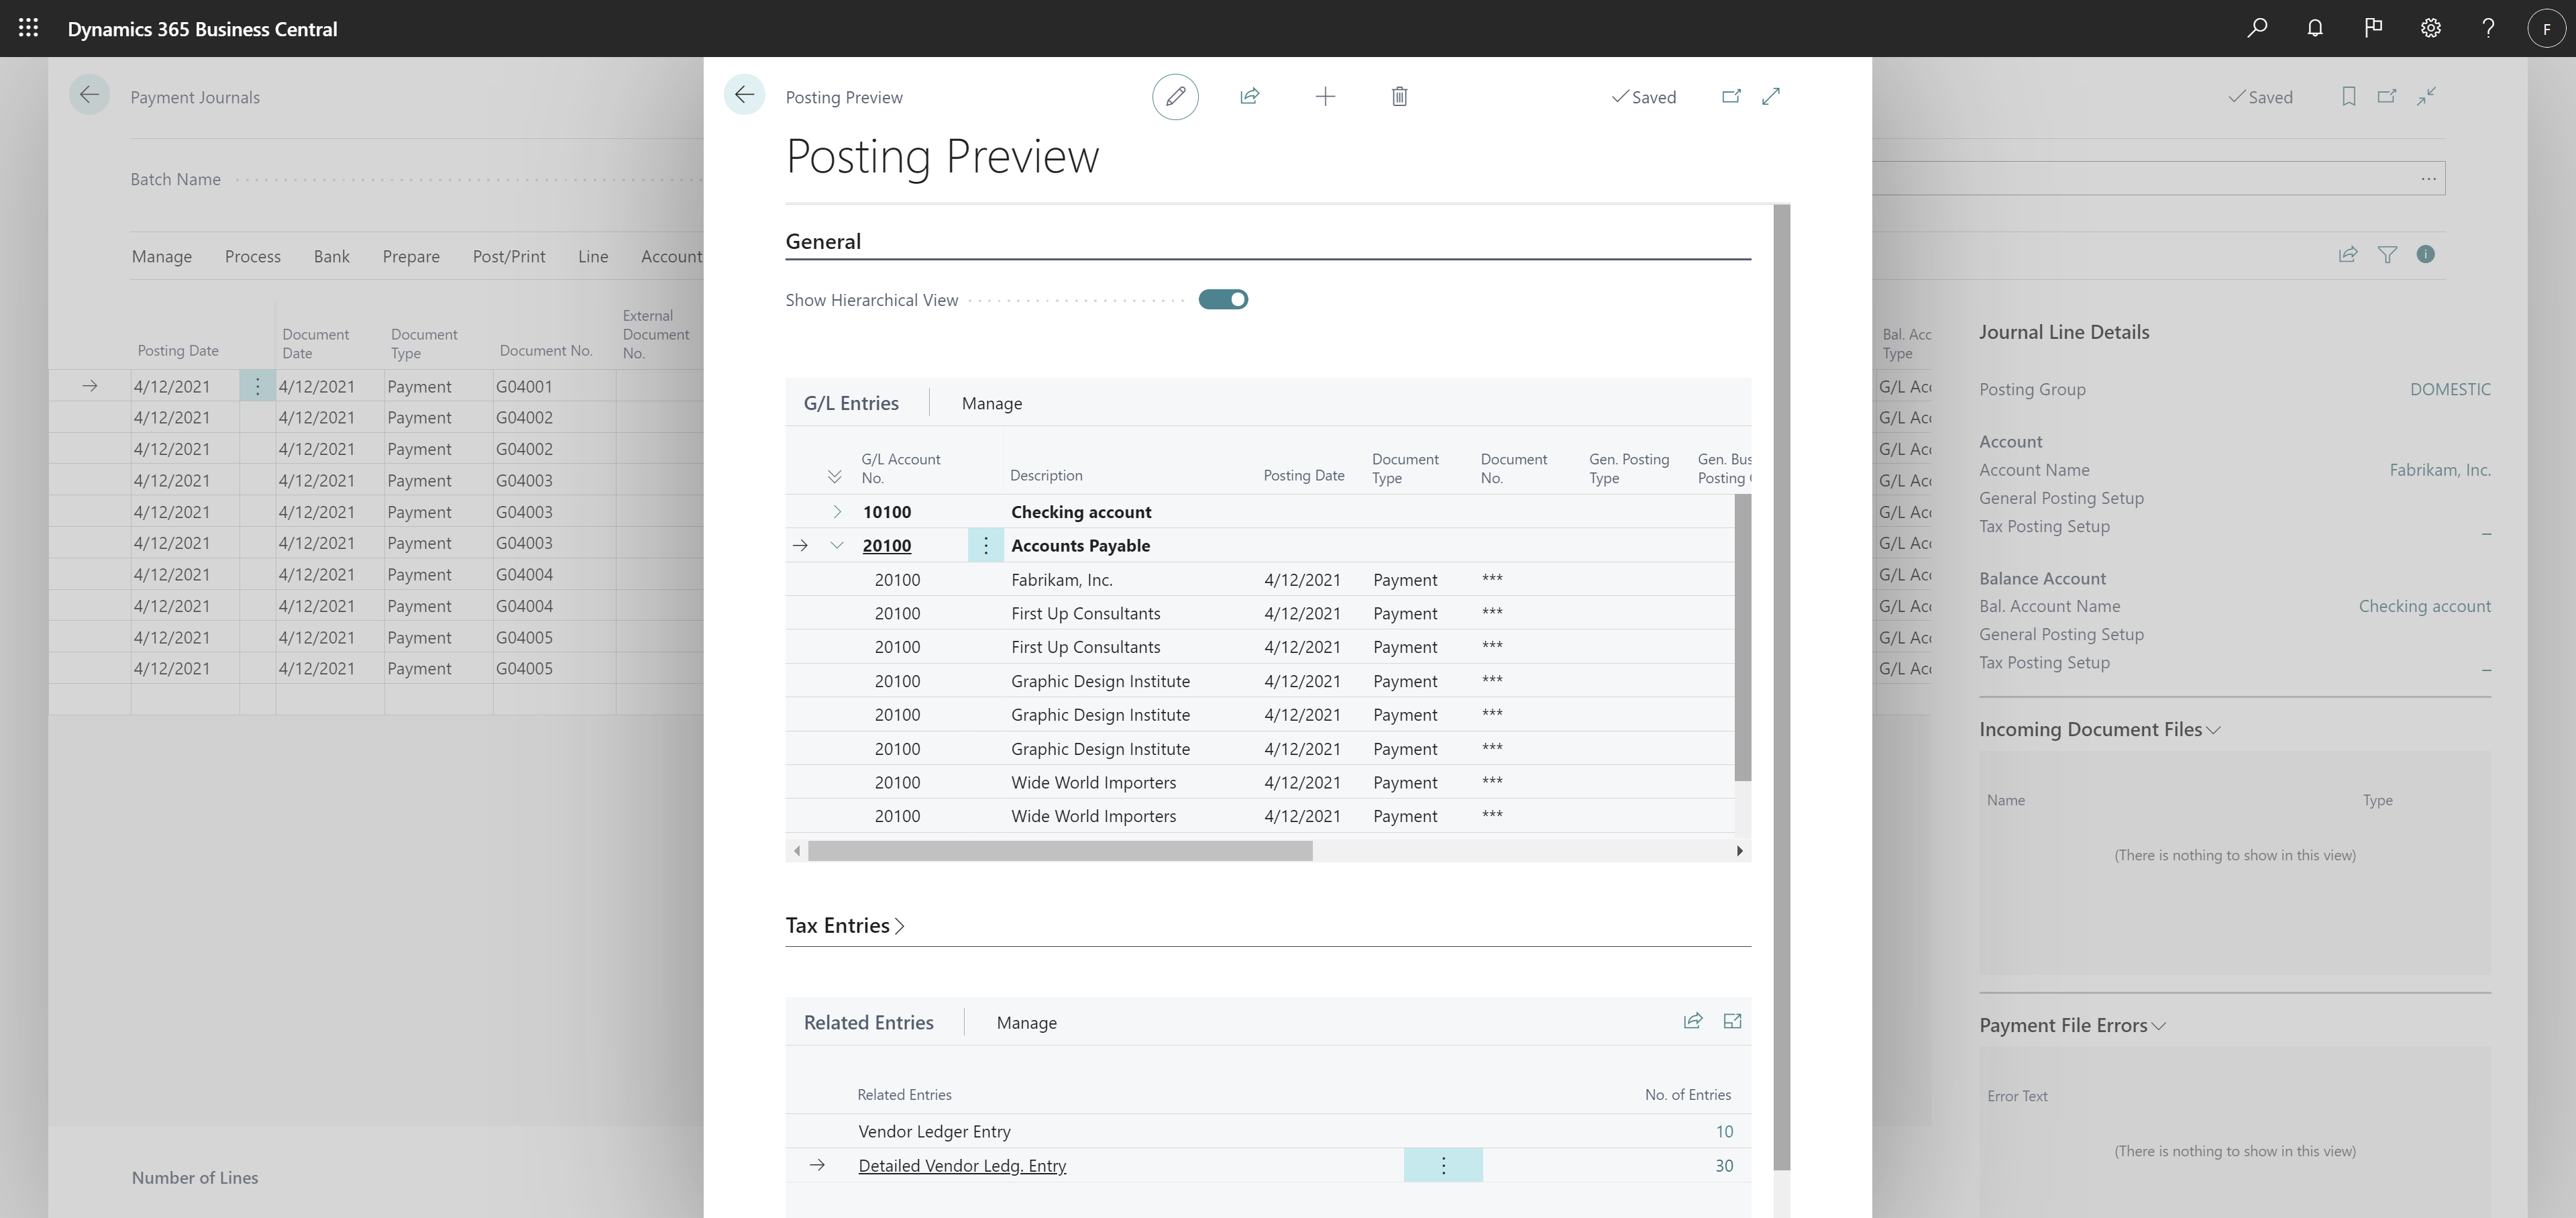 Shows new capability to show grouped view of general ledger entries in Posting Preview.